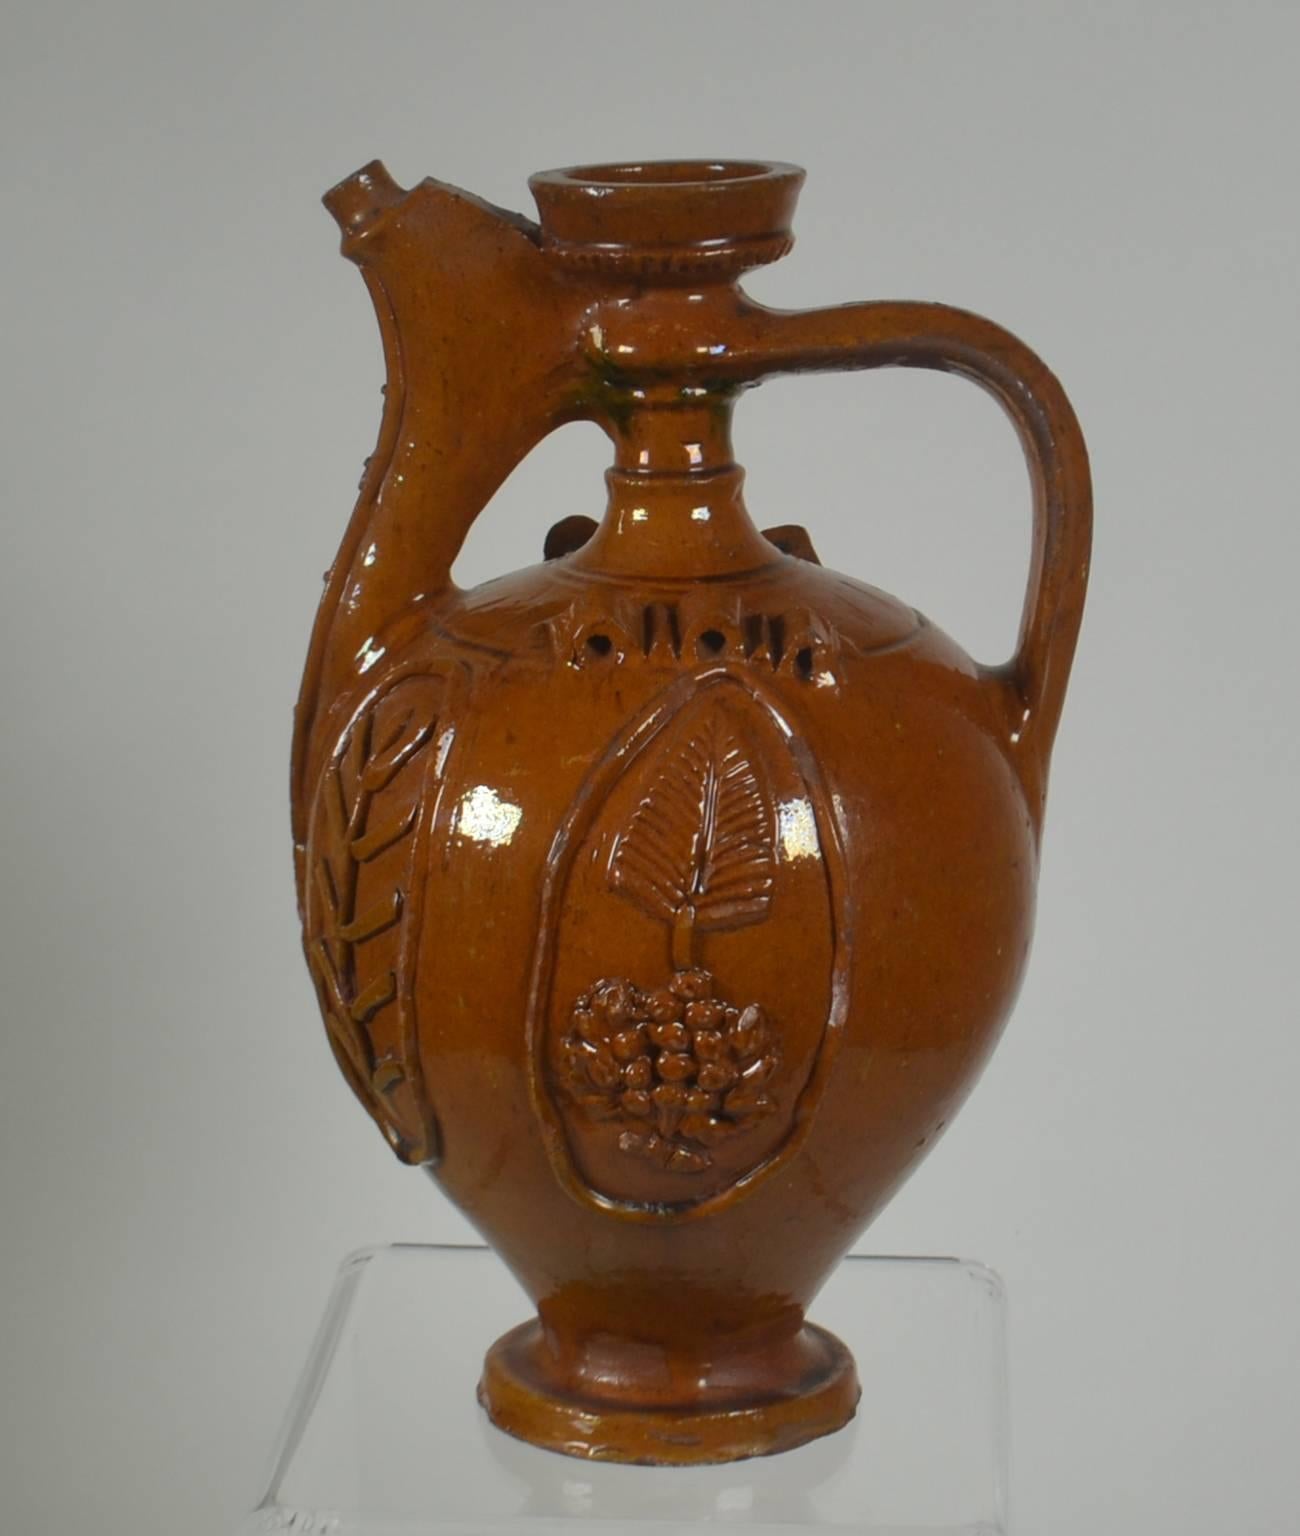 Earthenware pitcher 'Brown with relief design,' circa 1900. Once a common piece of pottery used daily in French kitchens, these earthenware jugs have become showcase pieces sought by designers and collectors. These beautiful vessels offer a depth of